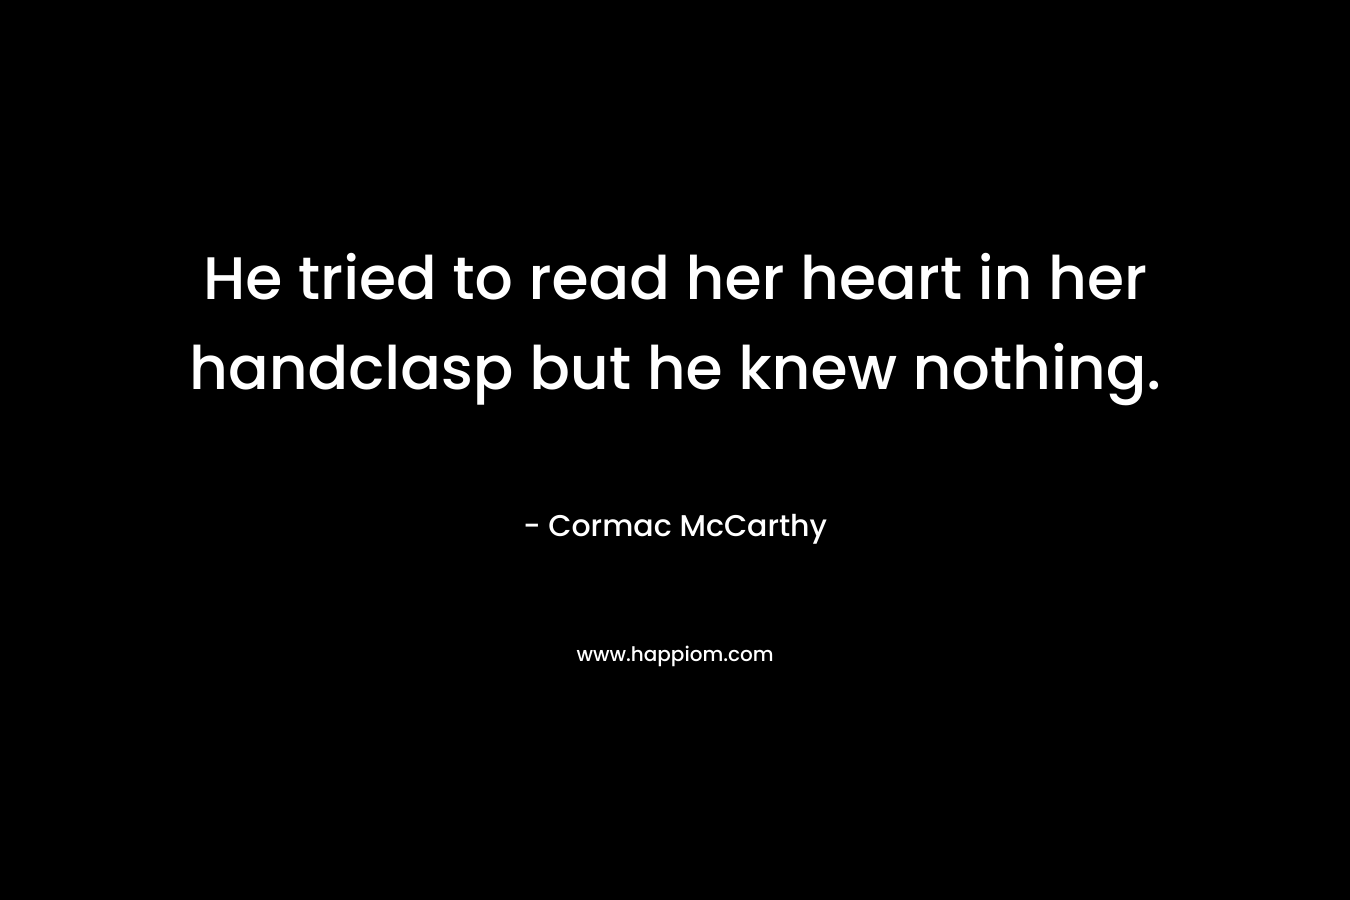 He tried to read her heart in her handclasp but he knew nothing. – Cormac McCarthy